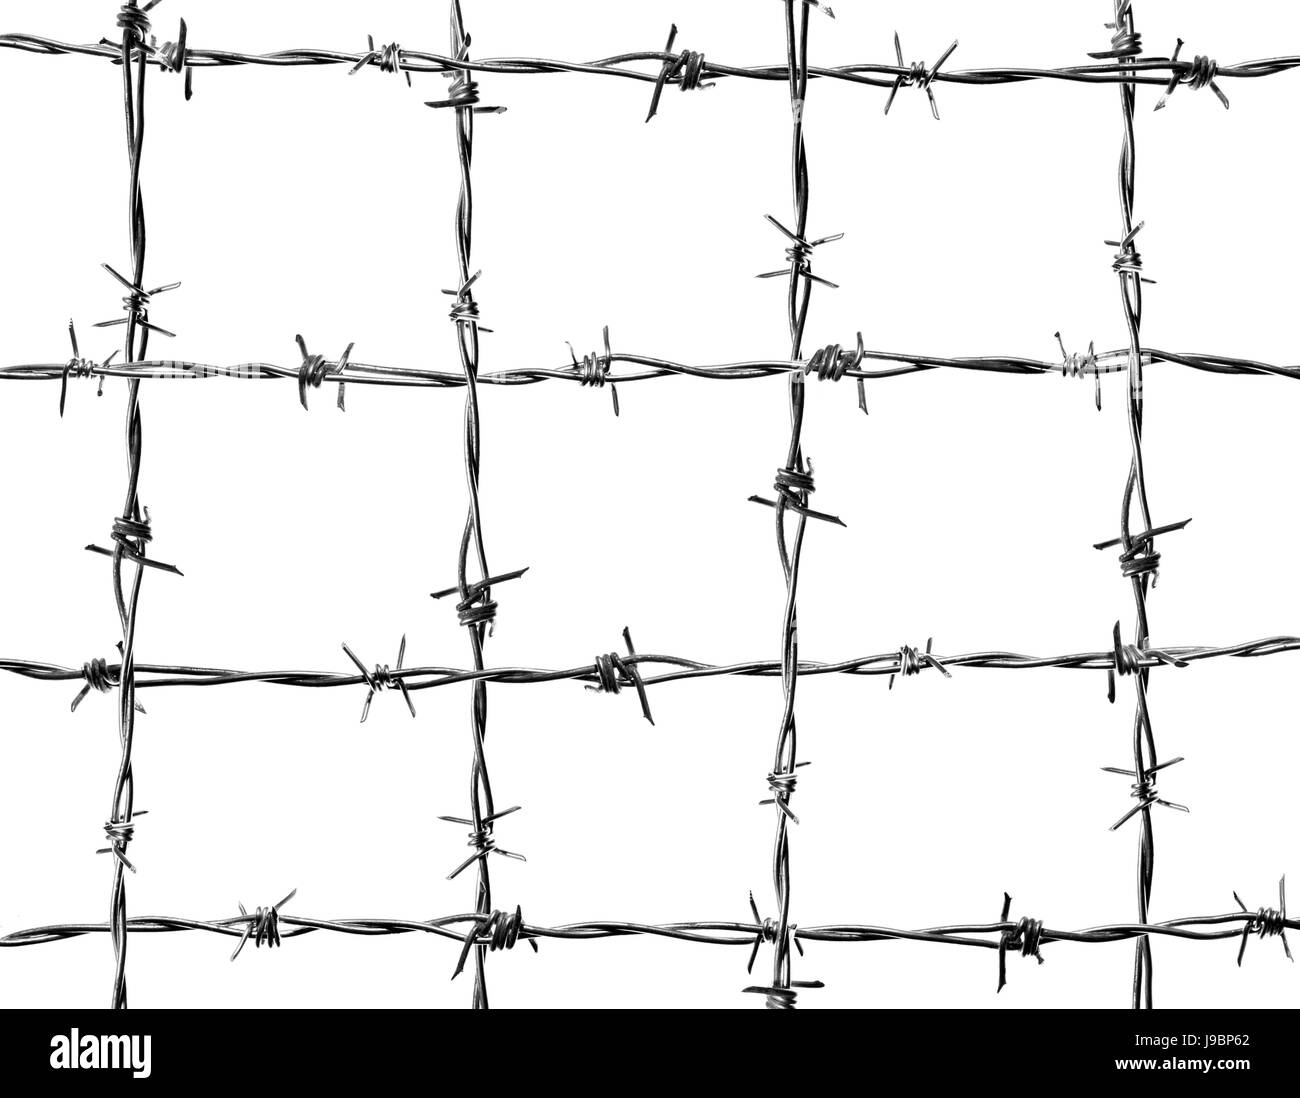 4 horizontal lines and 4 vertical of new and clean barbed wire isolated against the white background Stock Photo